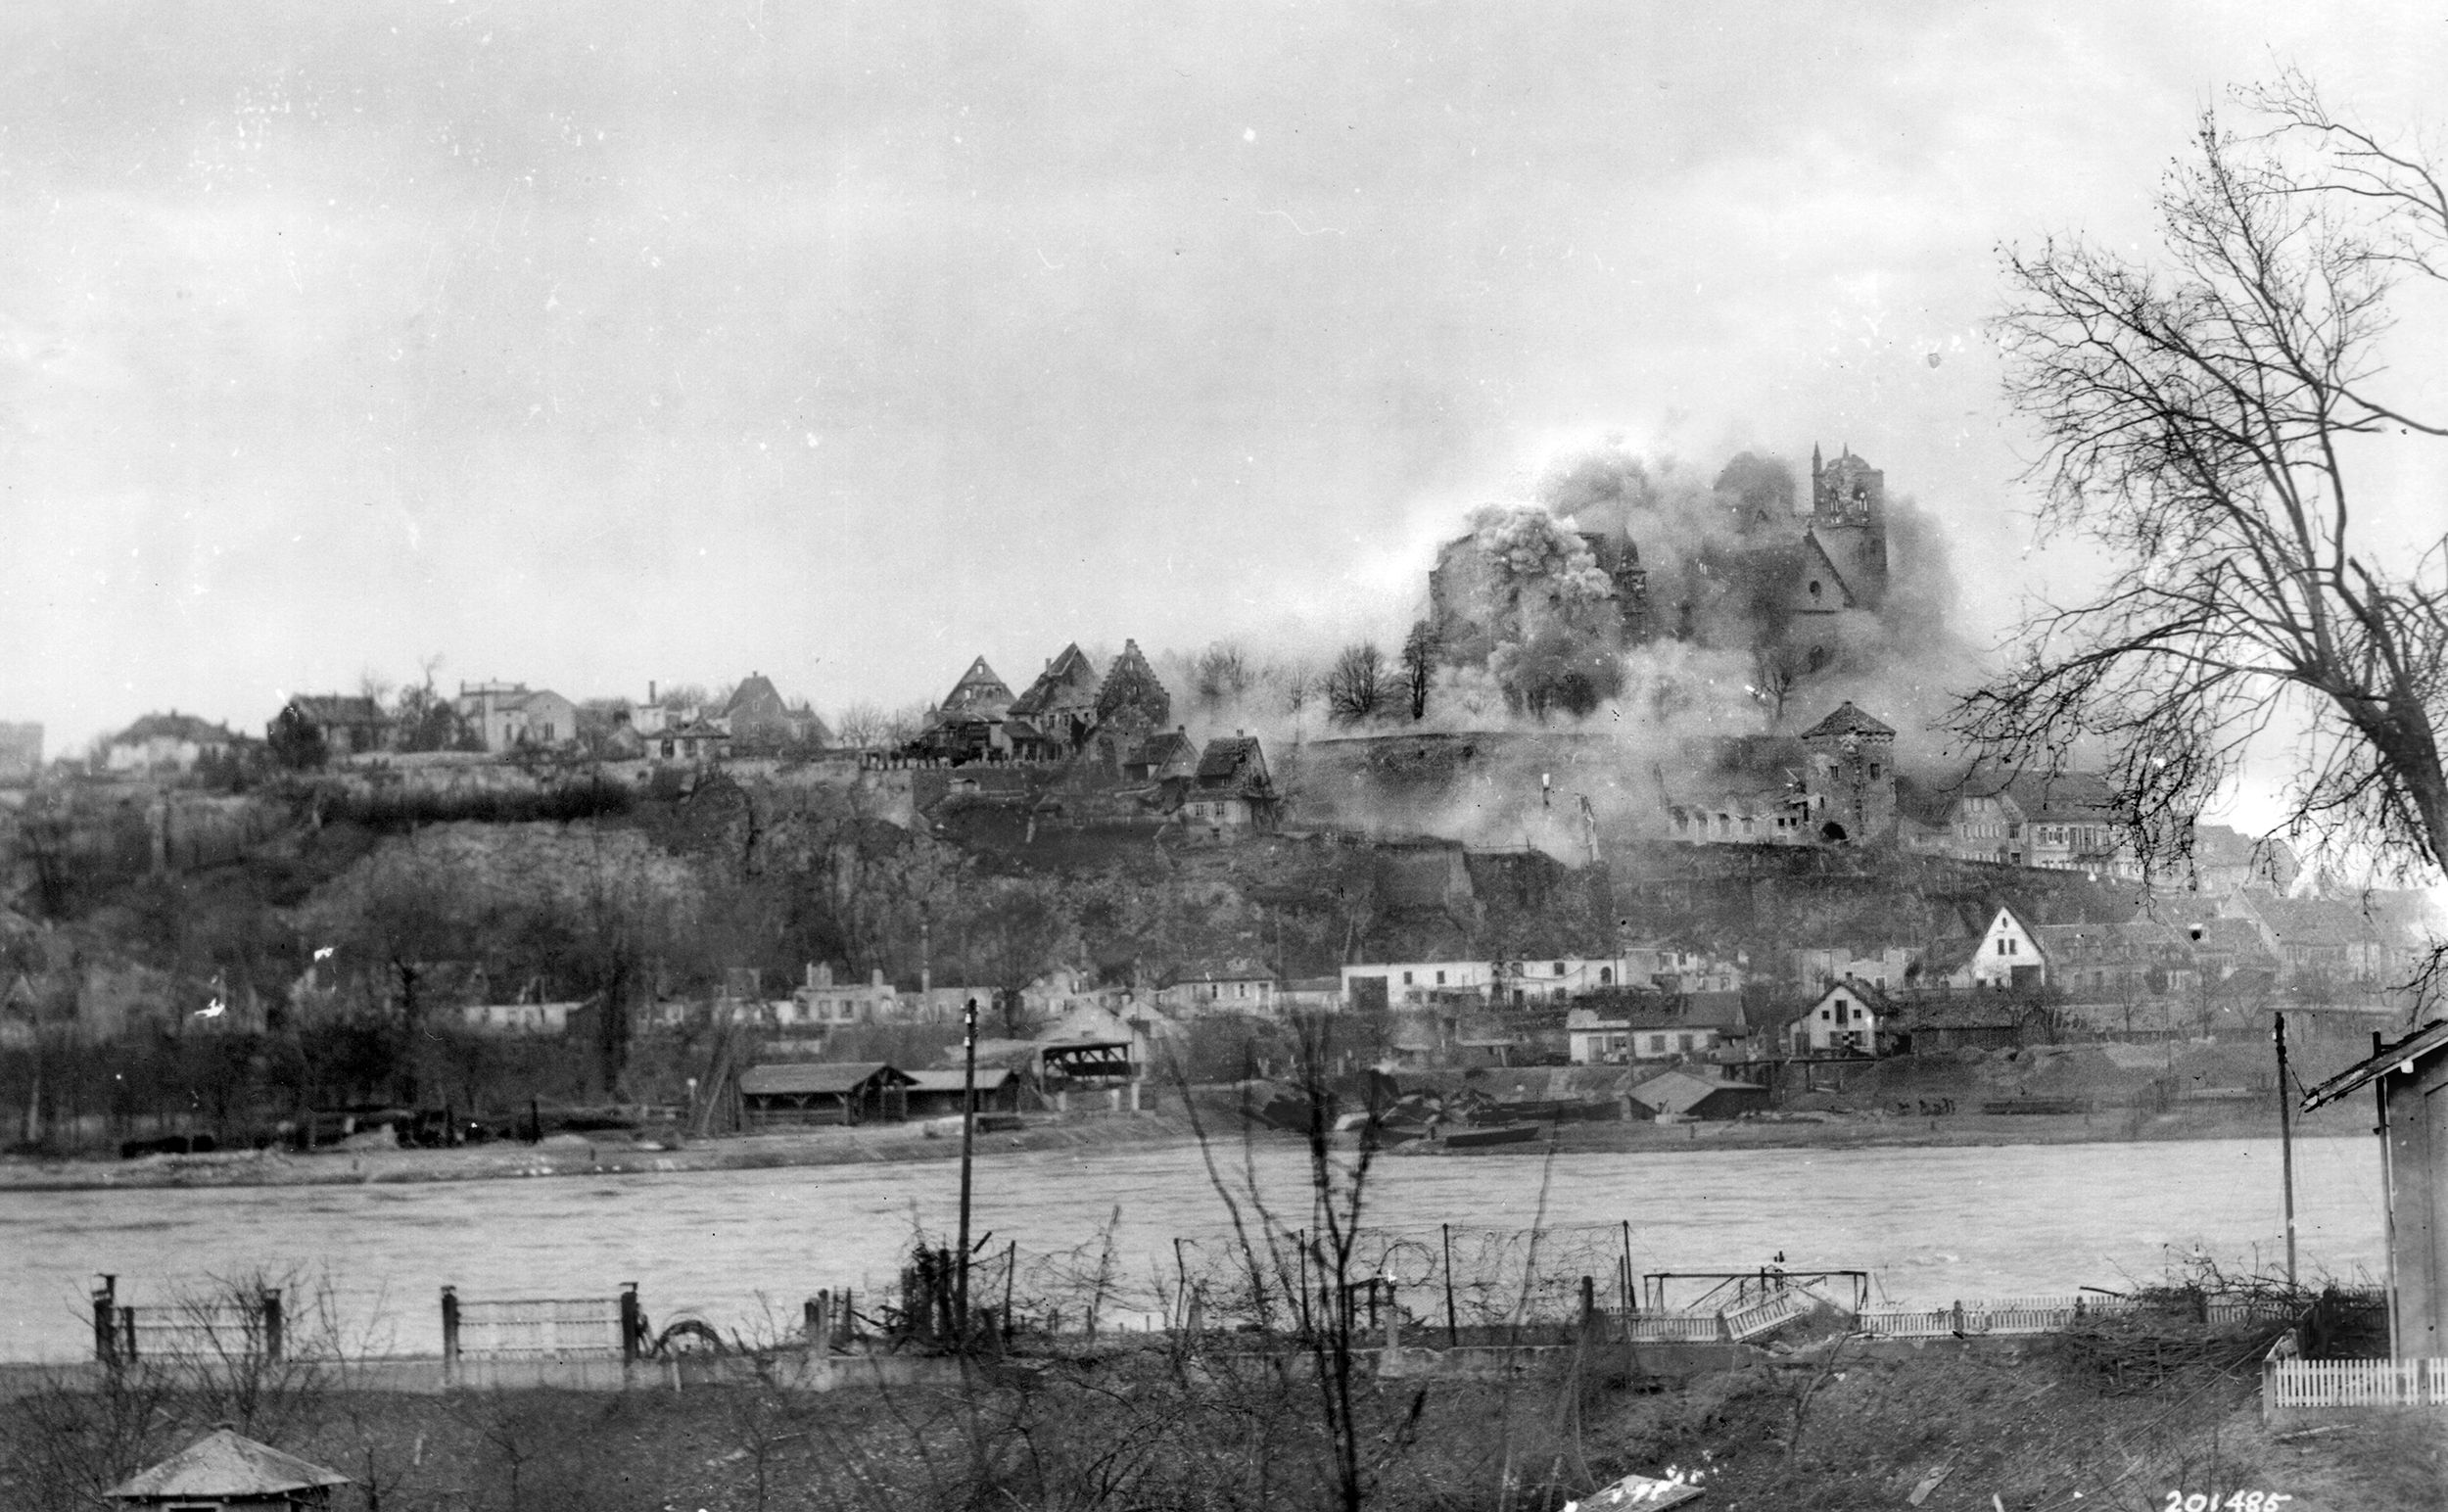 The U.S. 30th Infantry Regiment fires on German targets with its 155mm howitzers at Neuf Breisach on the Rhine River.